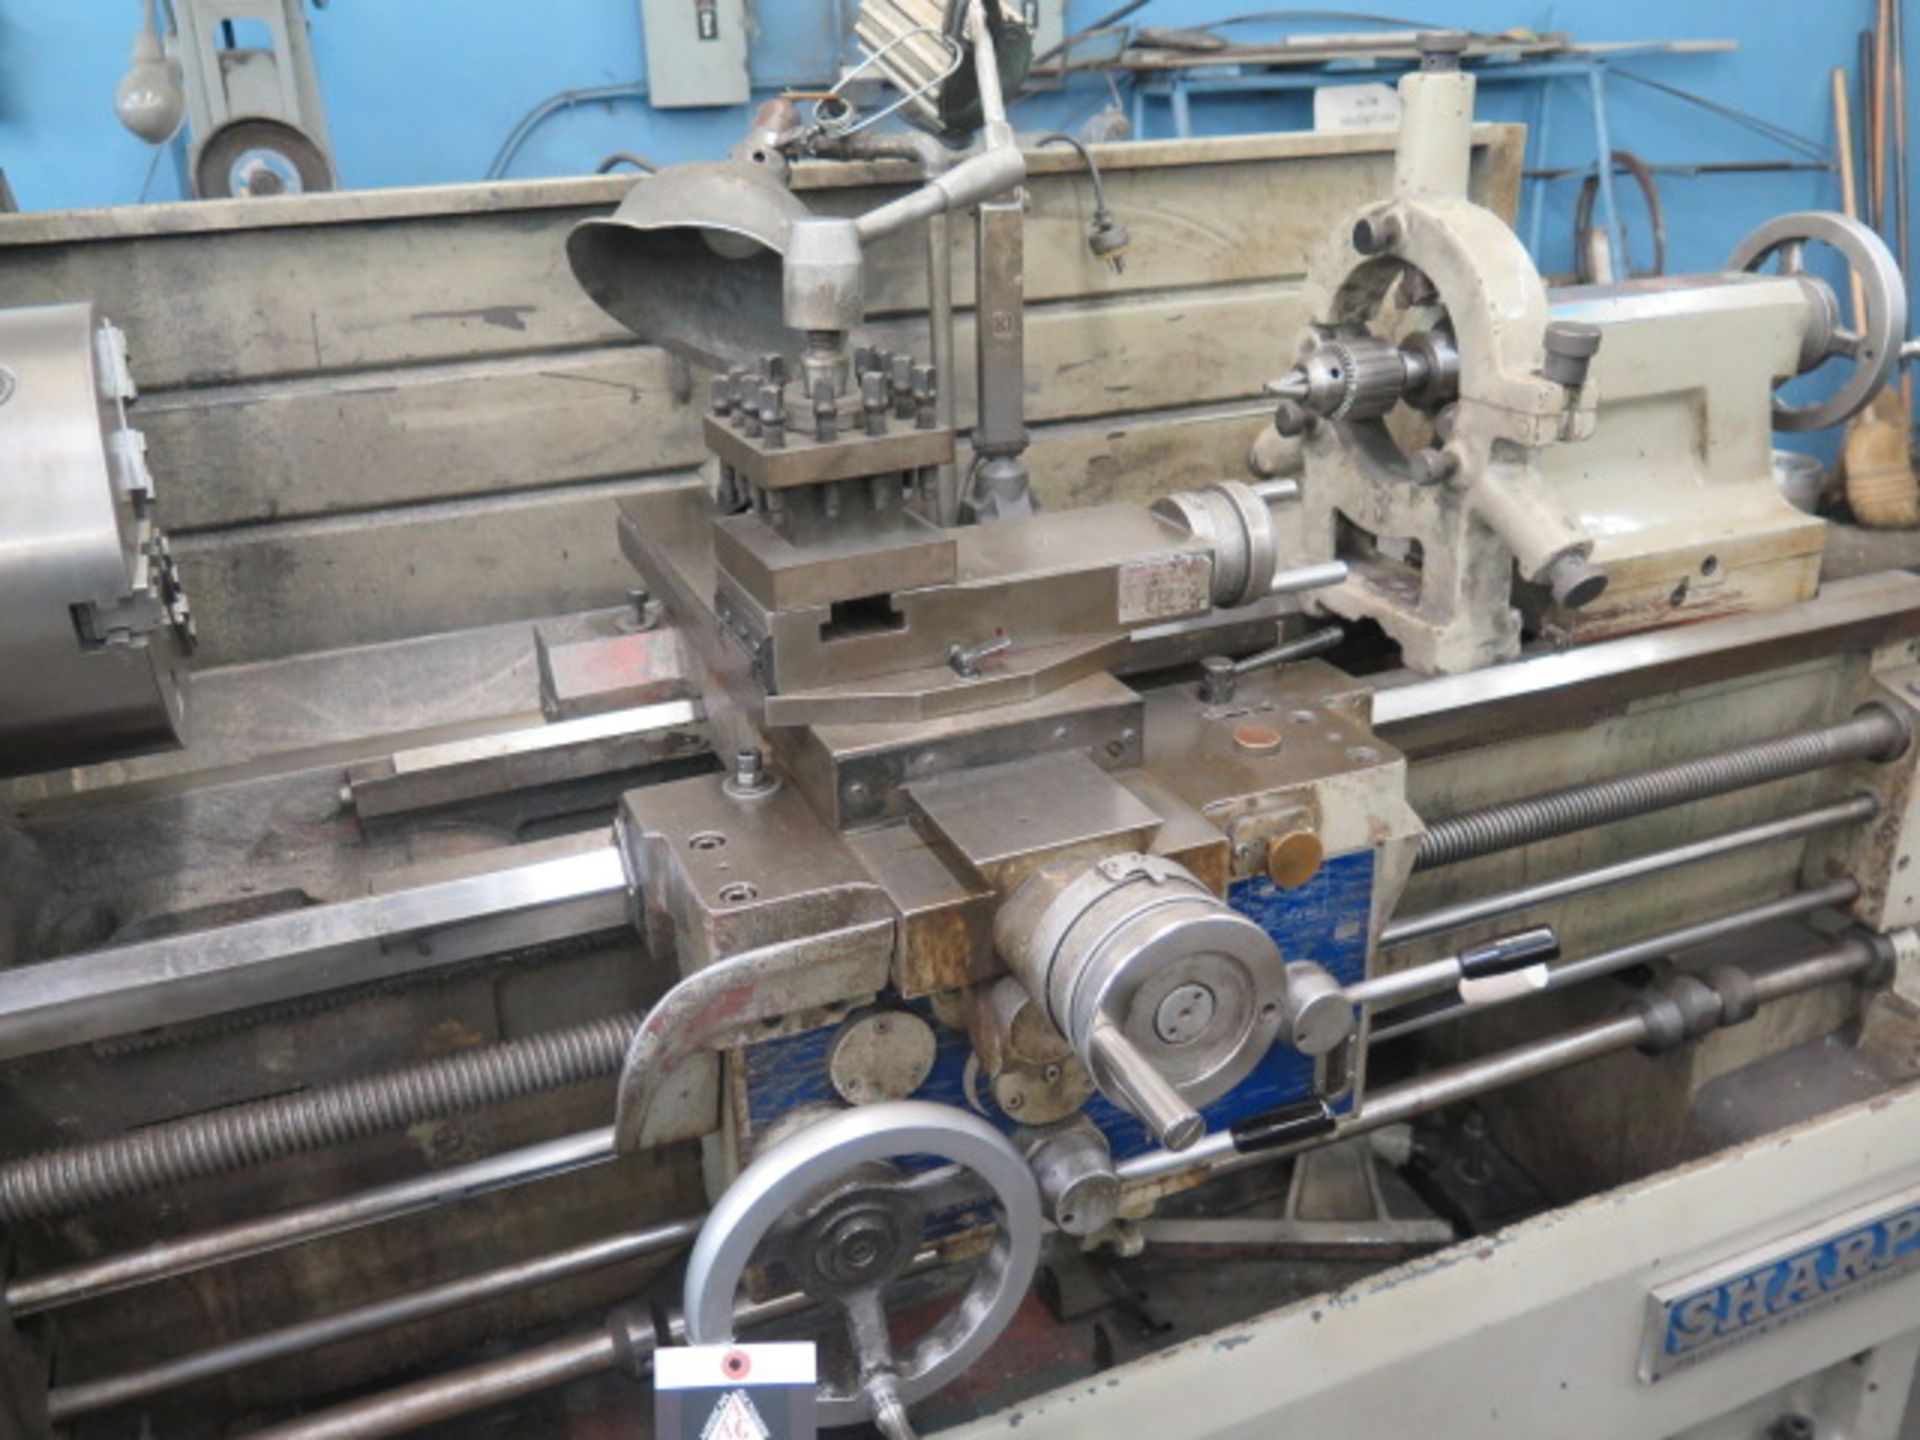 2003 Sharp 1640LV 16" x 40" Gap Bed Lathe s/n 2905217 w/ 20-2000 DVS Digital Variable, SOLD AS IS - Image 8 of 12